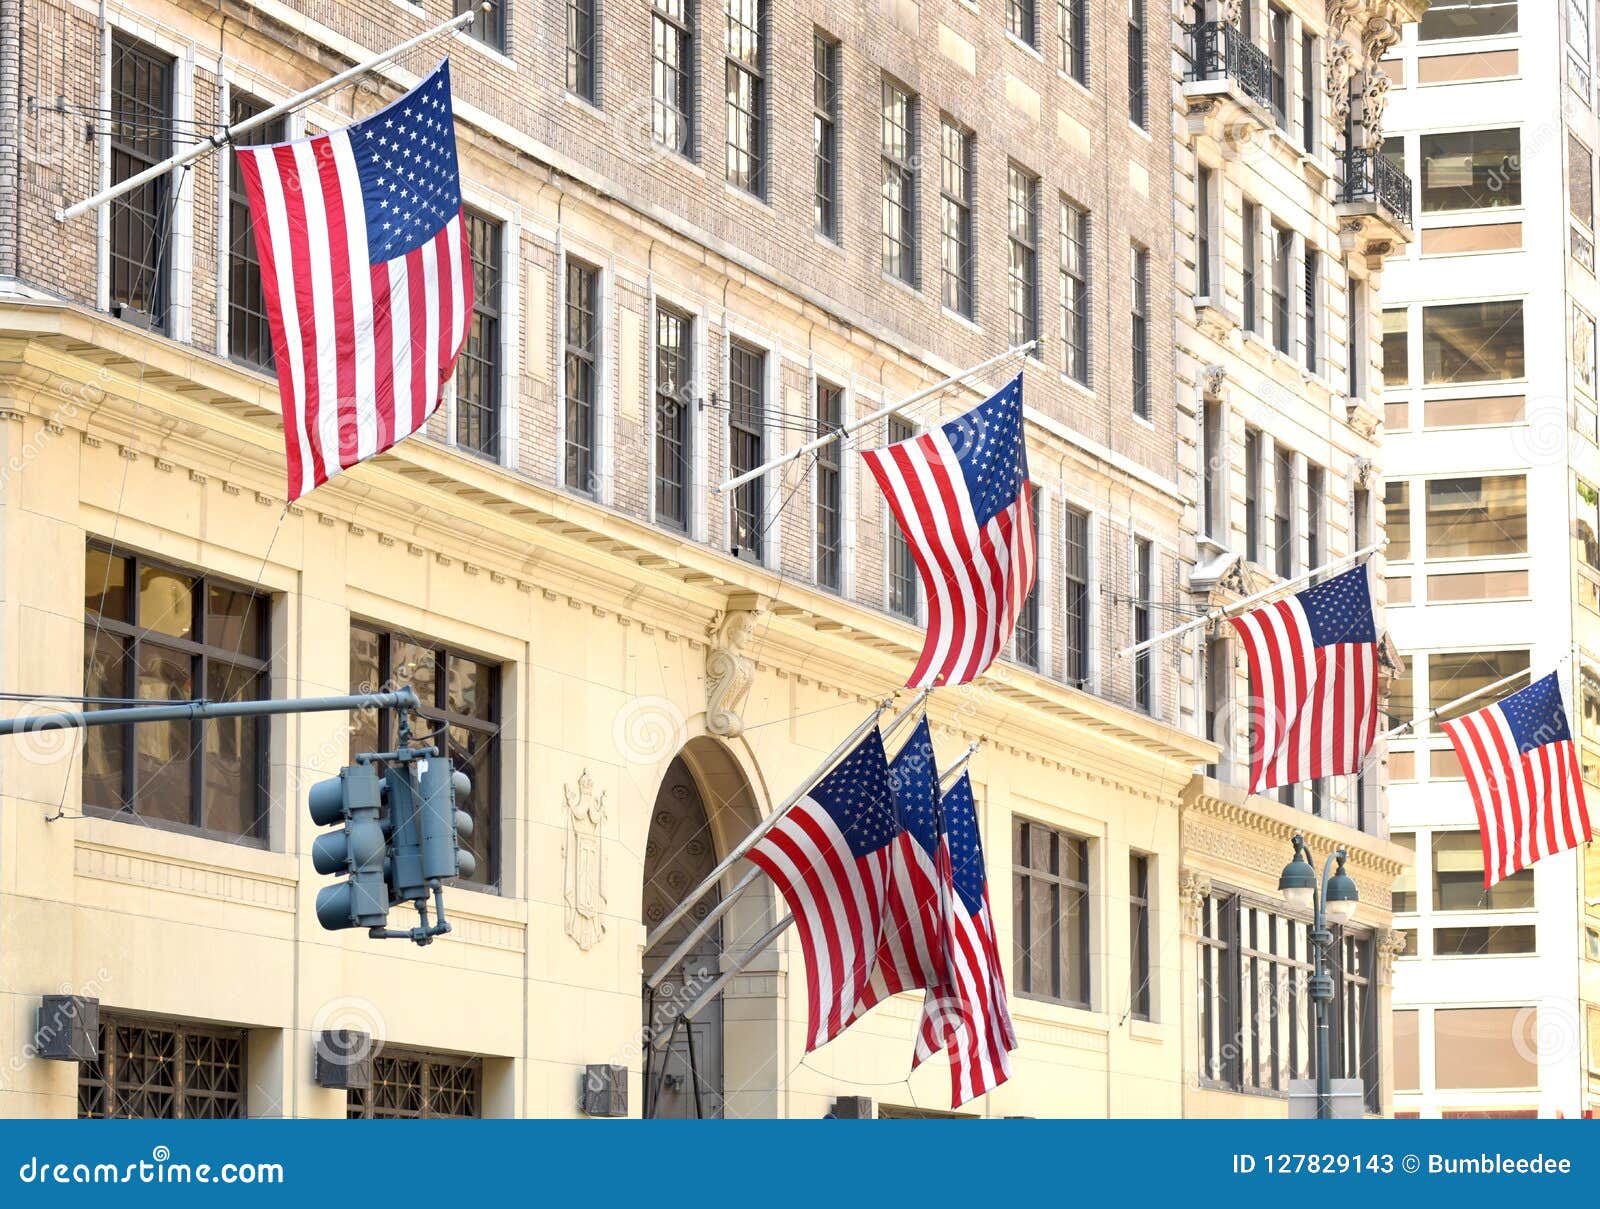 US Flags on a Building in New York, USA Stock Image - Image of landmark ...